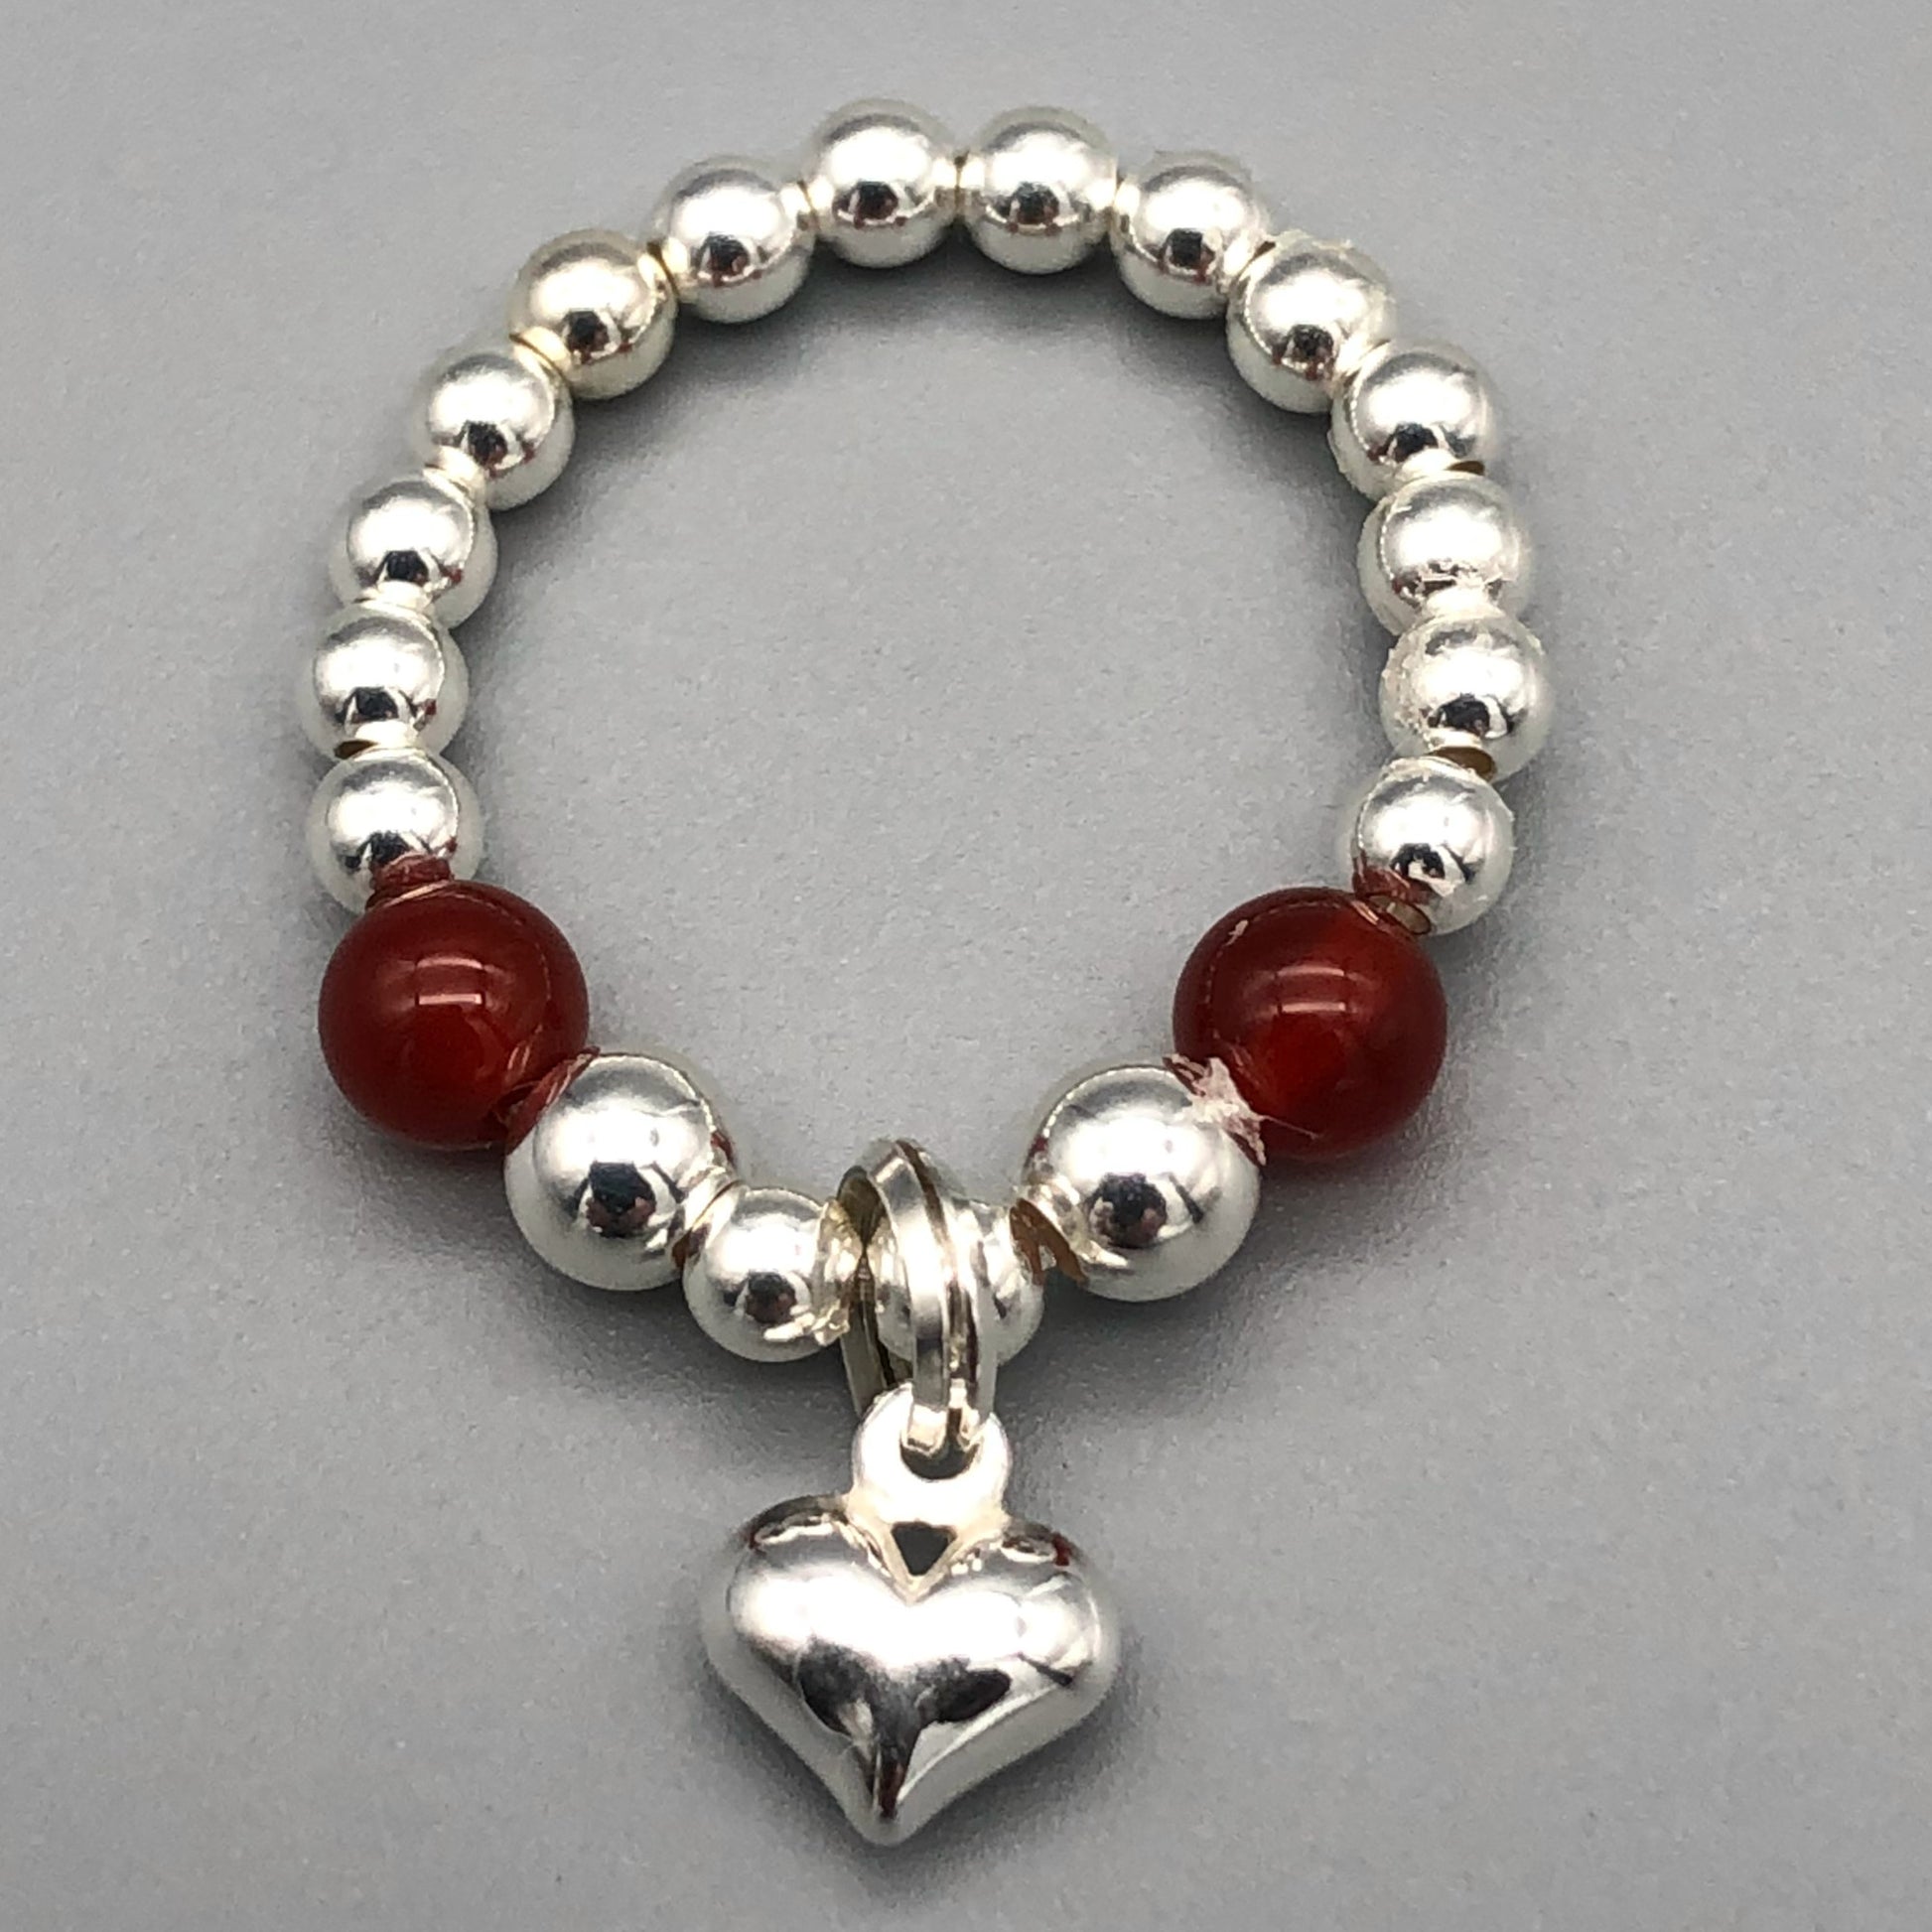 Heart charm sterling silver & carnelian bead women's stacking charm ring by My Silver Wish